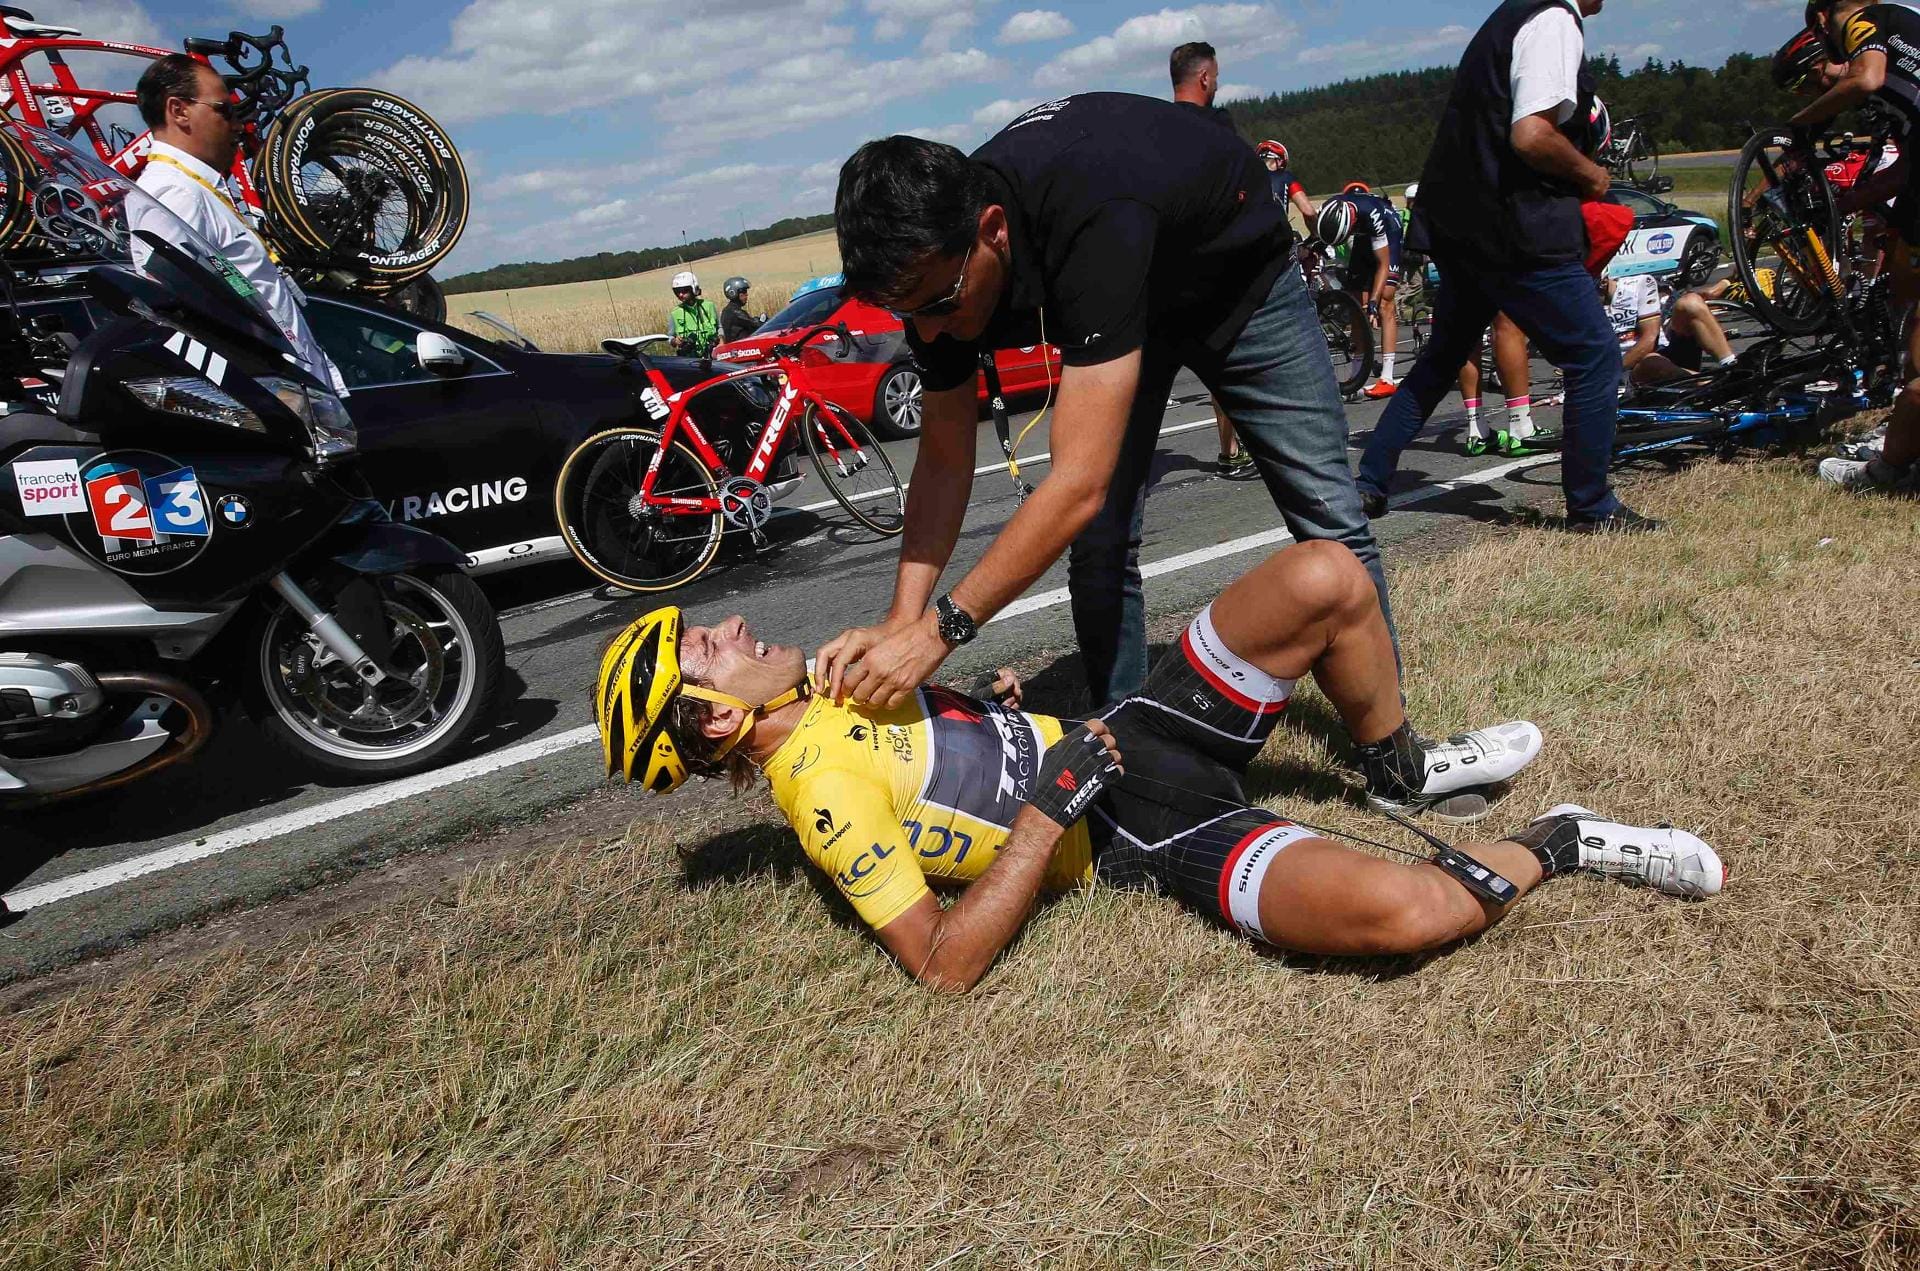 Race leader and yellow jersey holder Trek Factory rider Fabian Cancellara of Switzerland receives assistance as he lies on the ground after a fall during the third stage of the 102nd Tour de France cycling race from Anvers to Huy